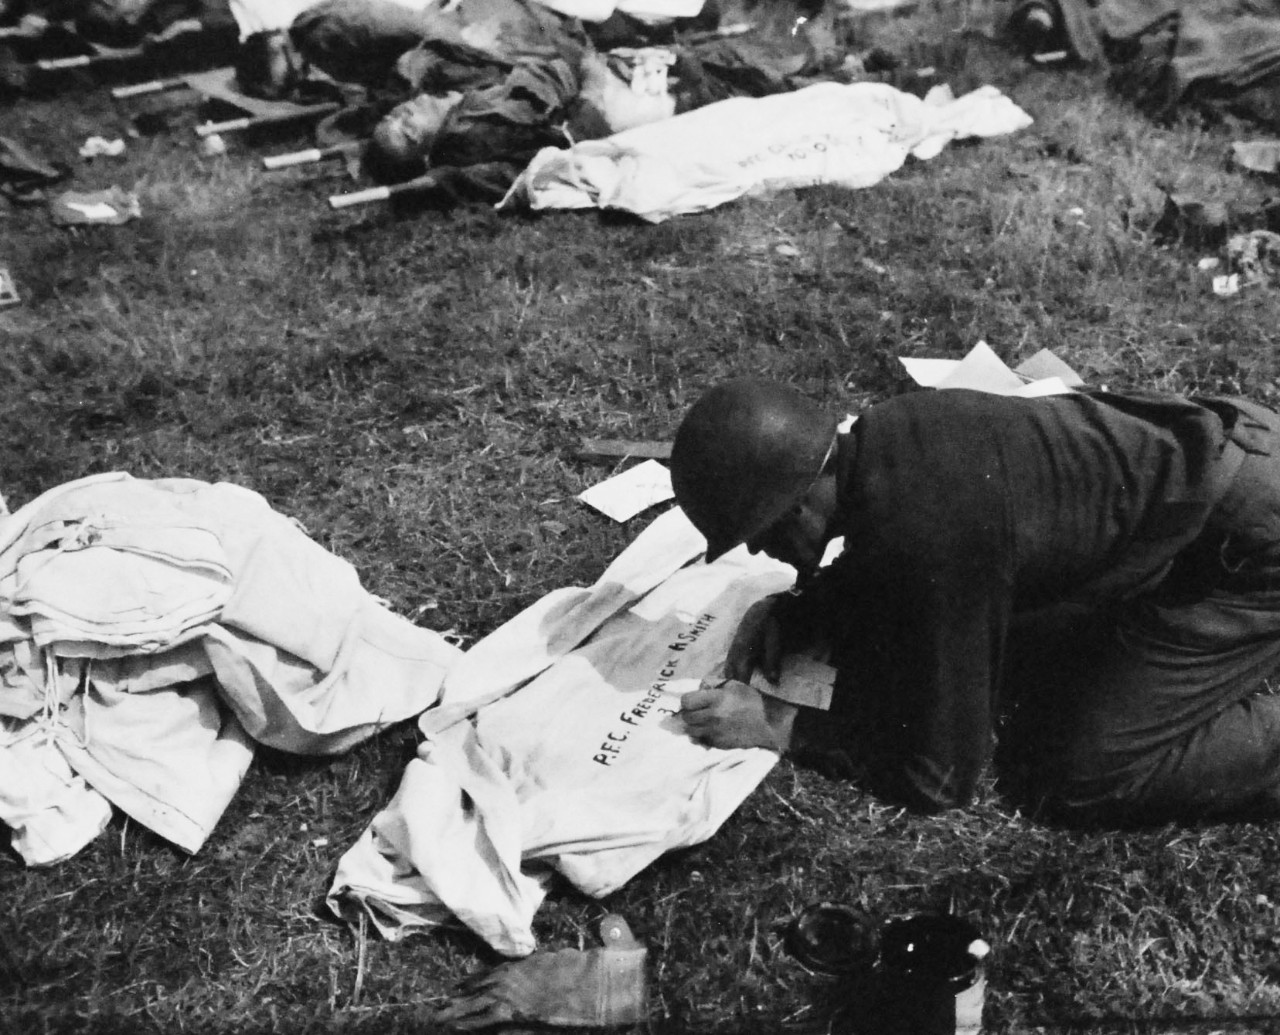 80-G-252670:   Normandy Invasion, June 1944.  Soldier lettering burial bag for American dead at temporary cemetery near Allied beachhead in France, 8 June 1944.  Official U.S. Navy Photograph, now in the collections of the National Archives.   (2014/10/28). 